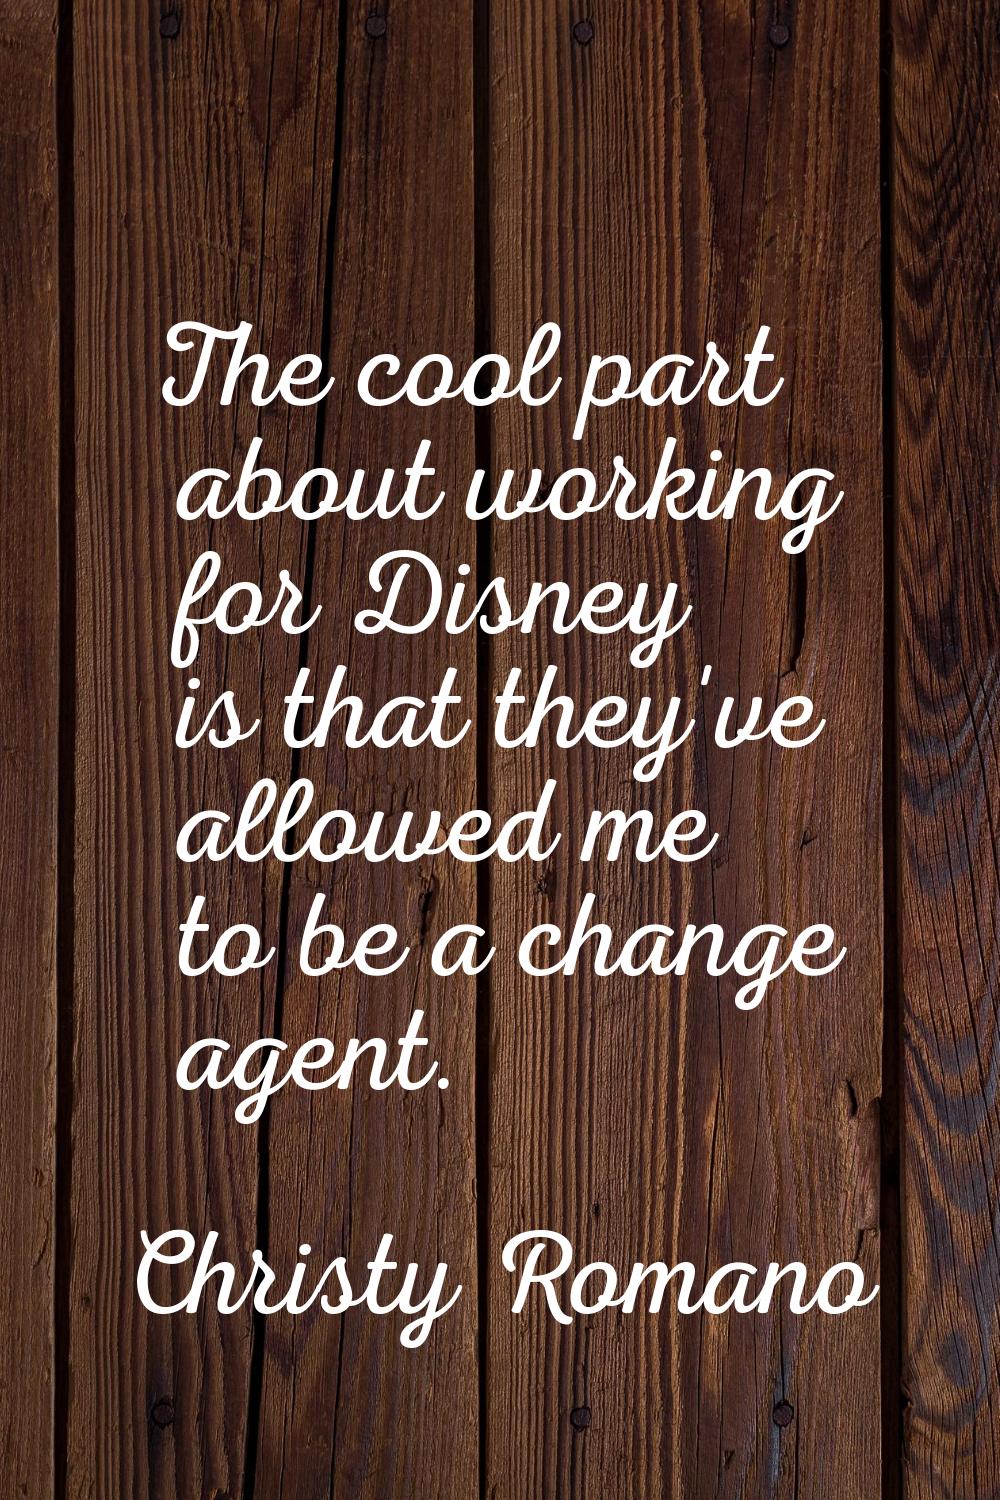 The cool part about working for Disney is that they've allowed me to be a change agent.